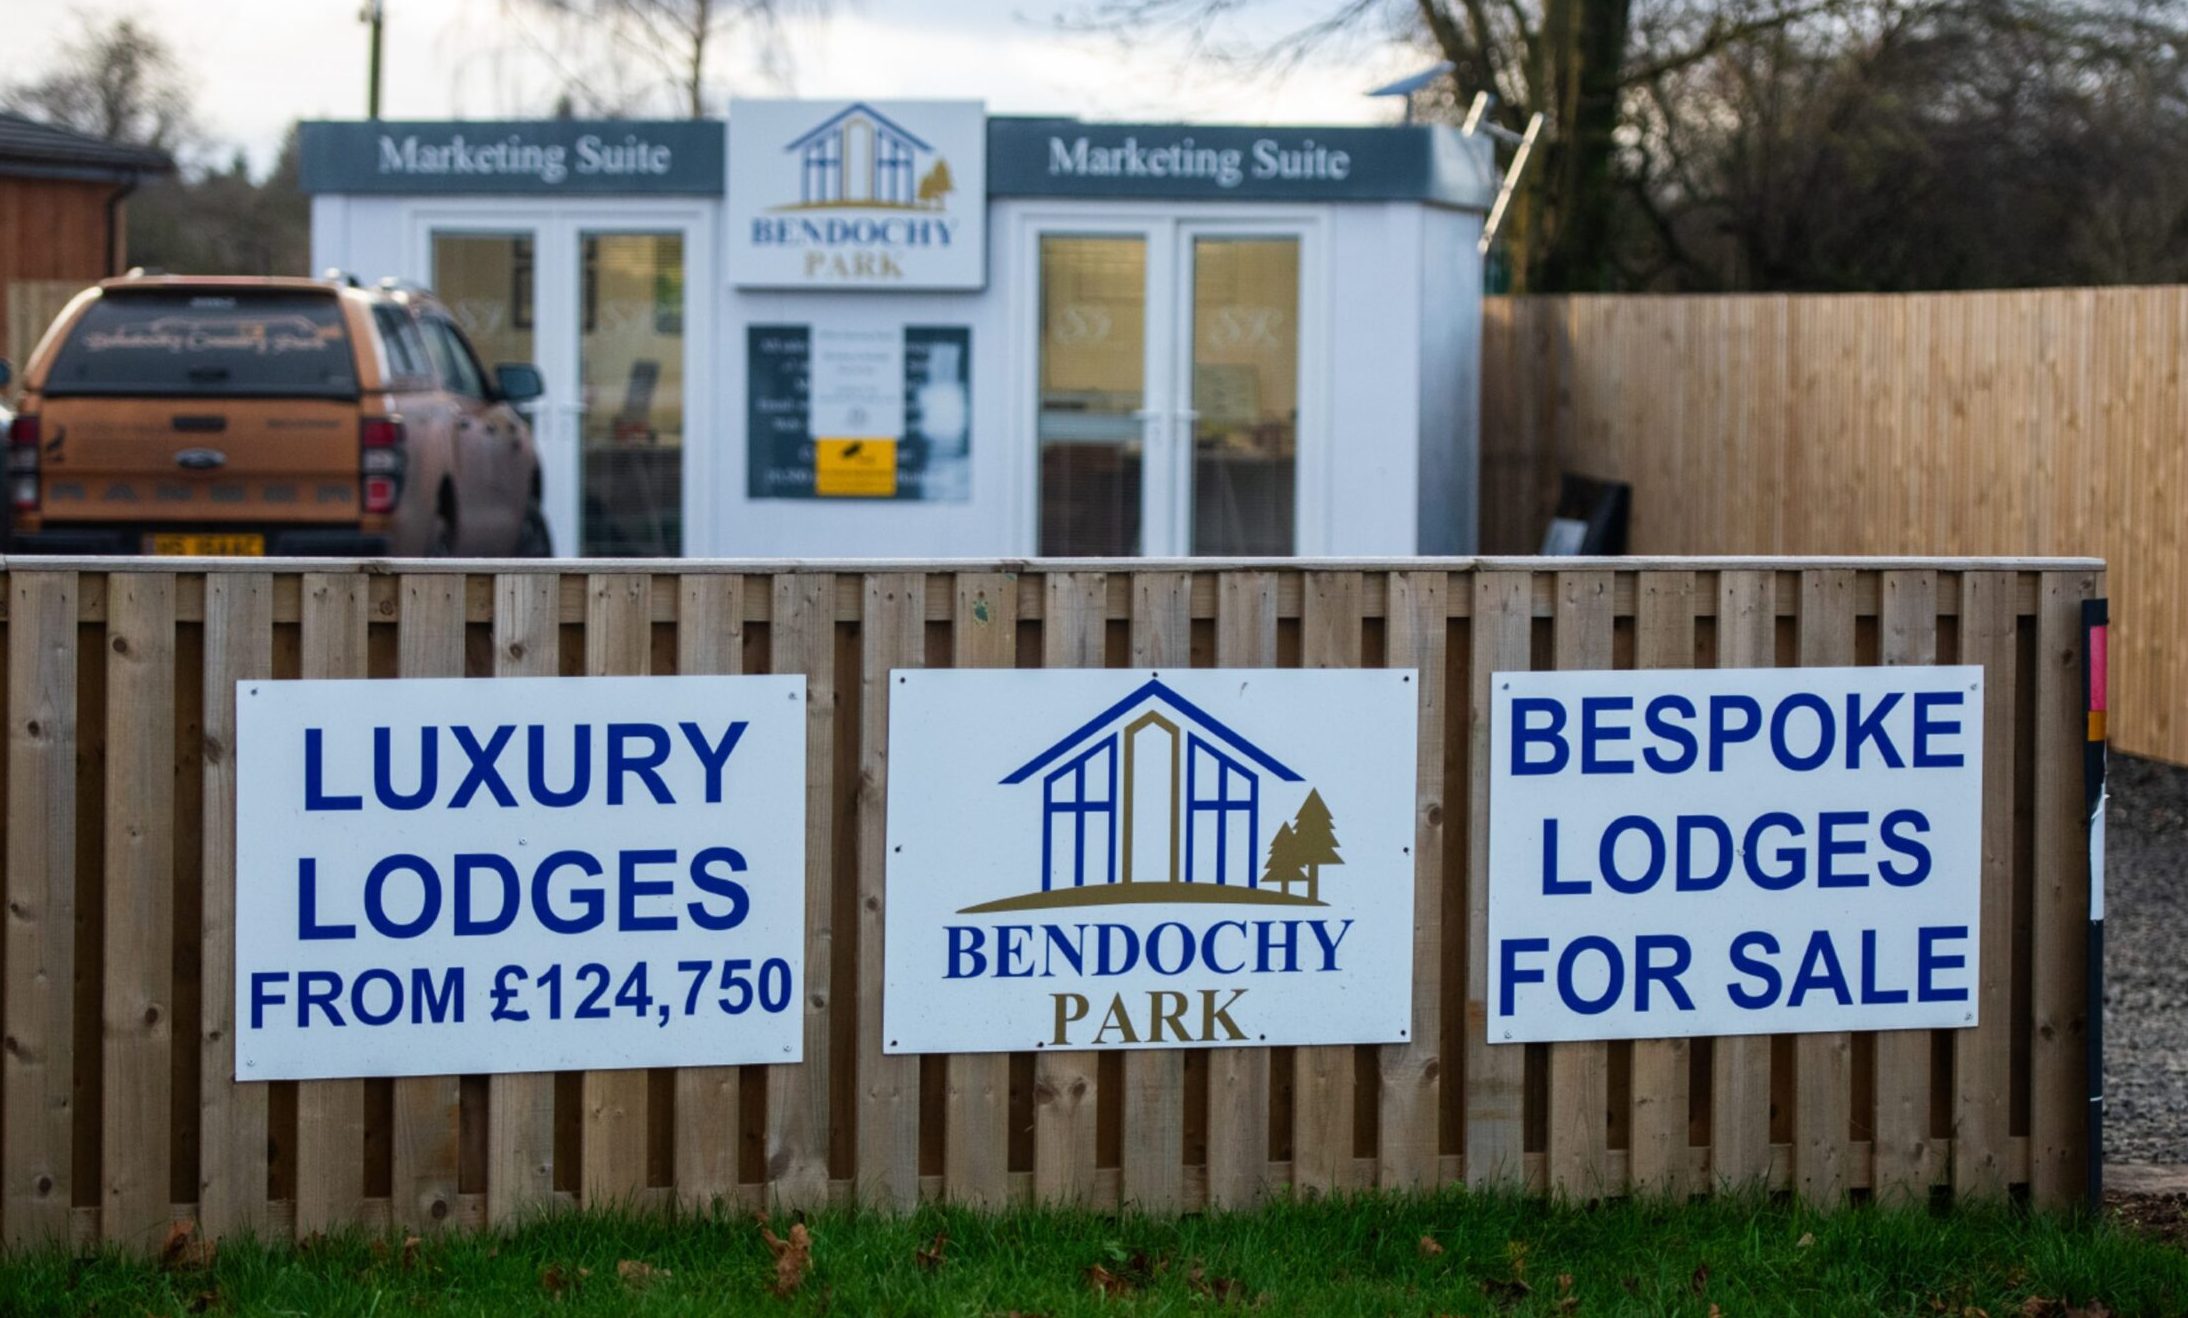 Council serves notice on new Blairgowrie holiday park over claims owners are living in lodges